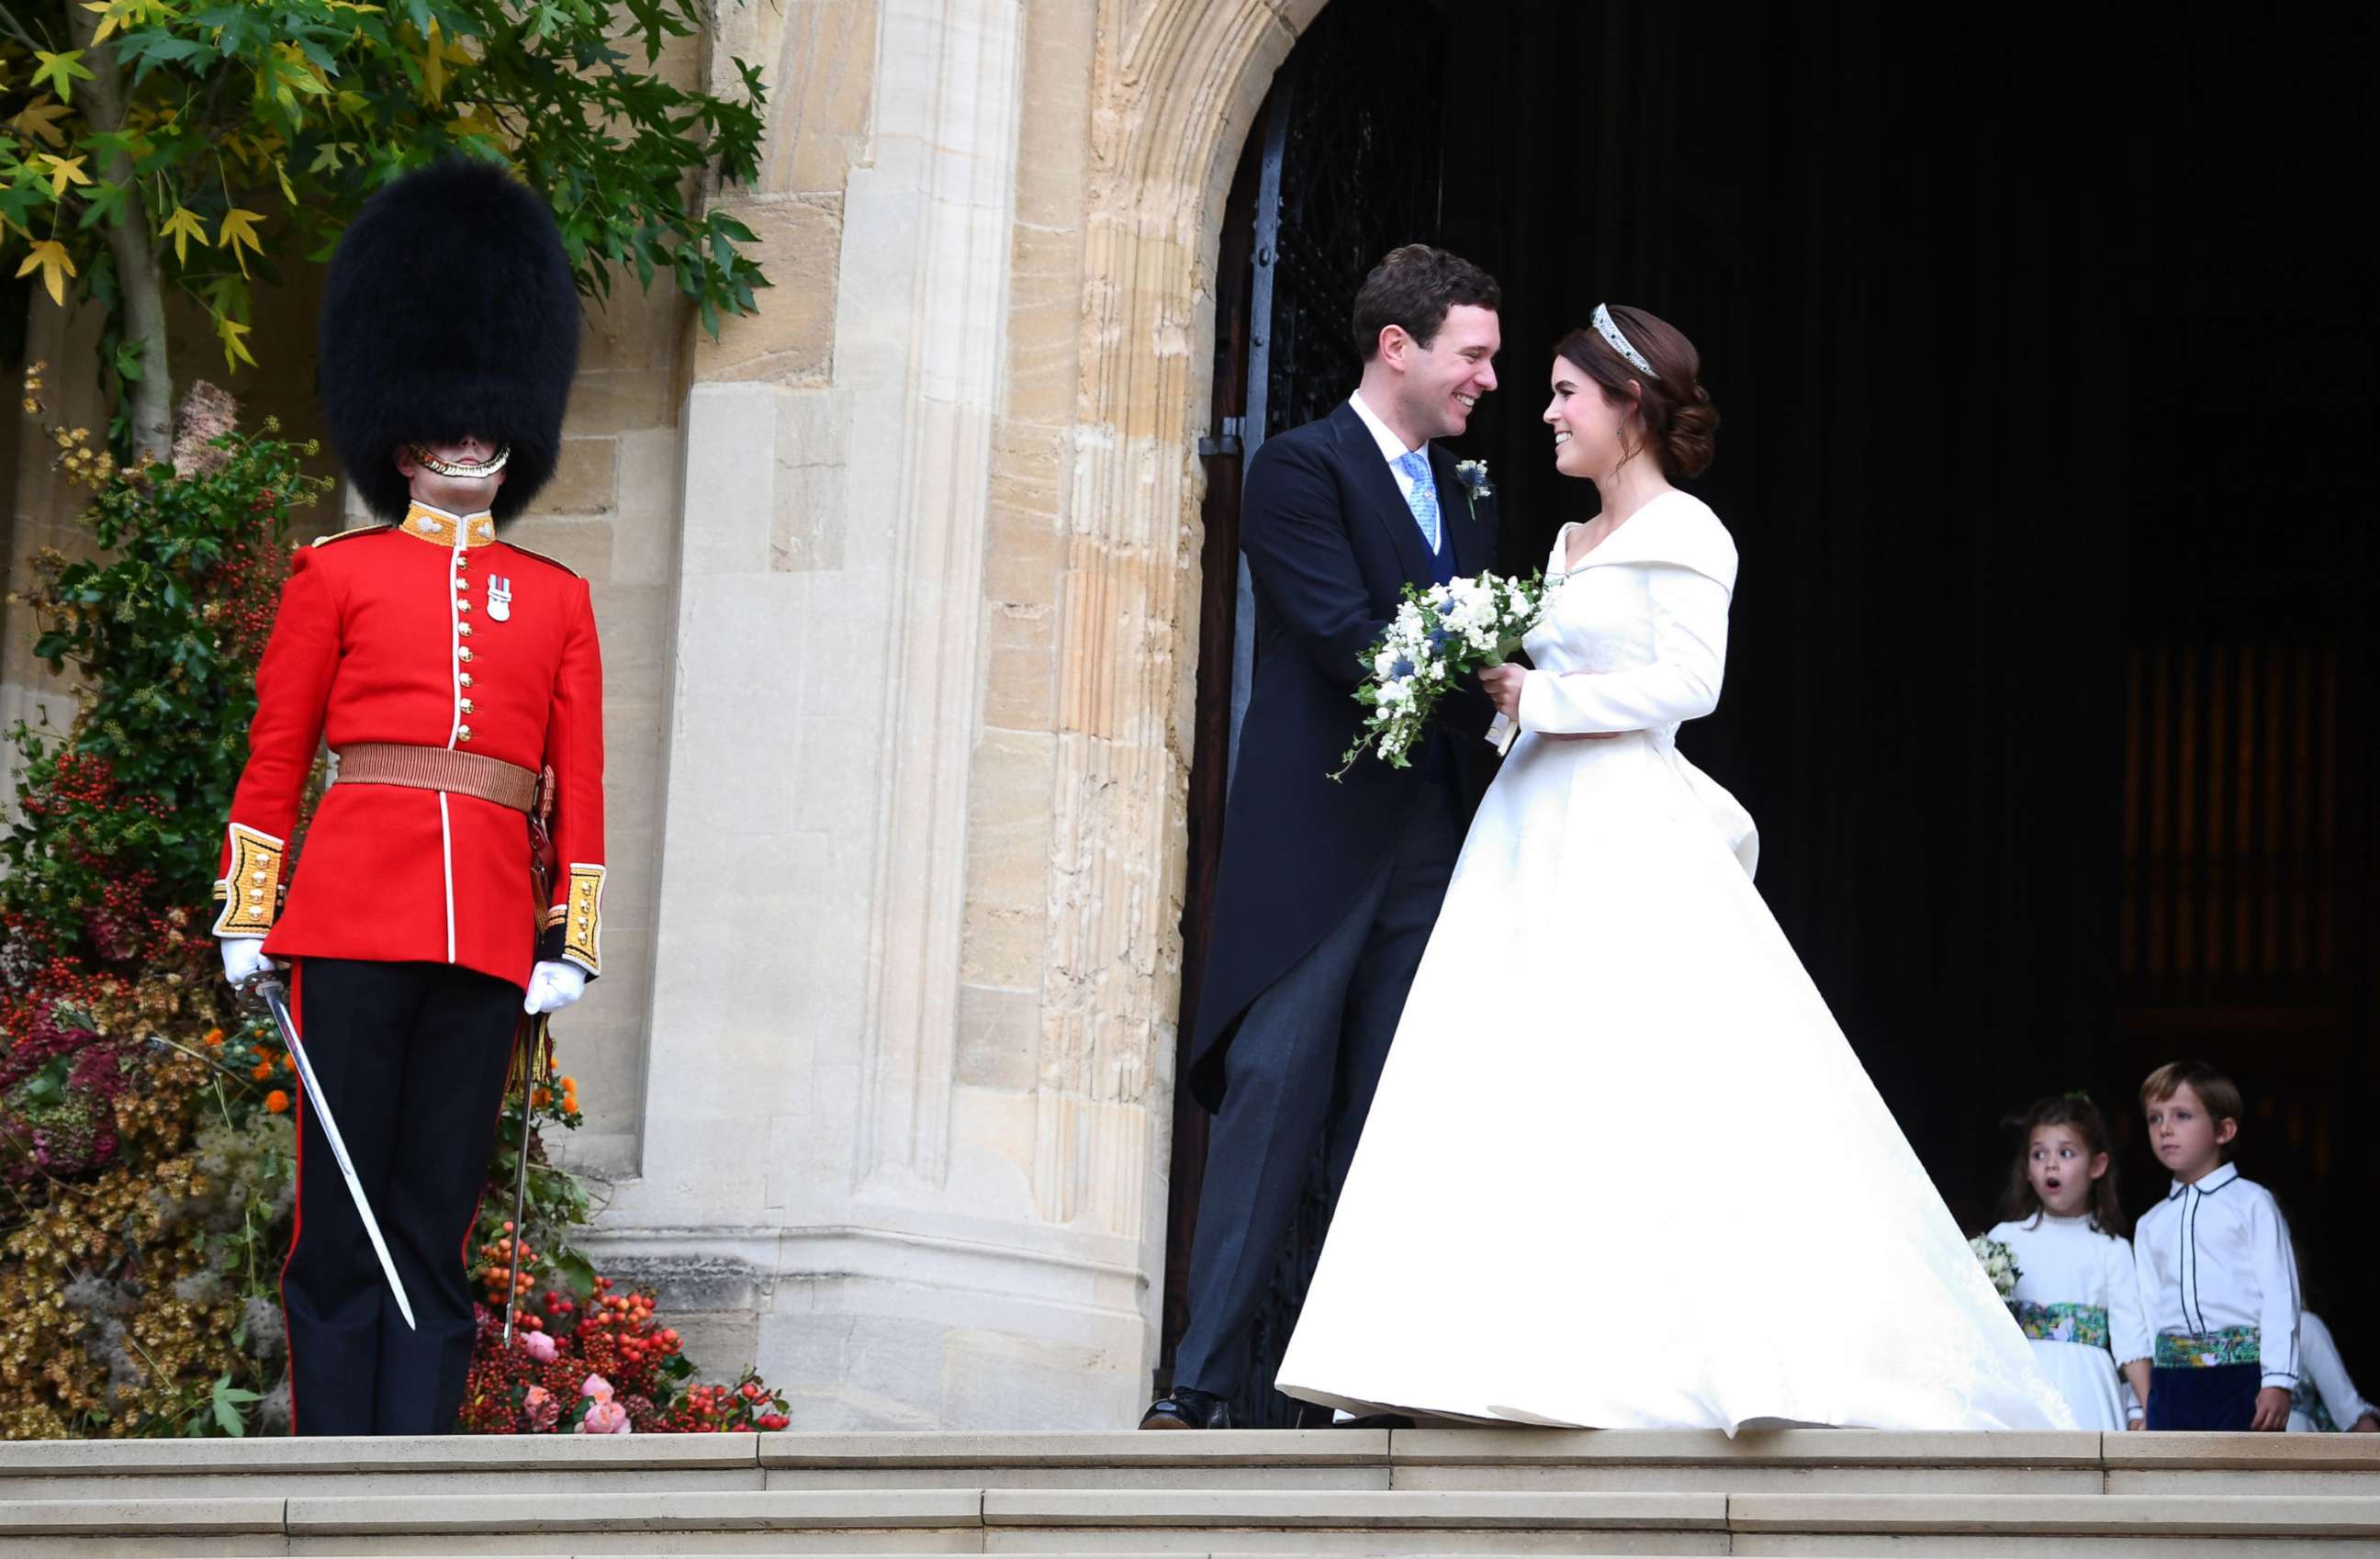 Princess Eugenie and her new husband Jack Brooksbank leave St George's Chapel in Windsor Castle following their wedding, Oct. 12, 2018, Windsor, U.K.